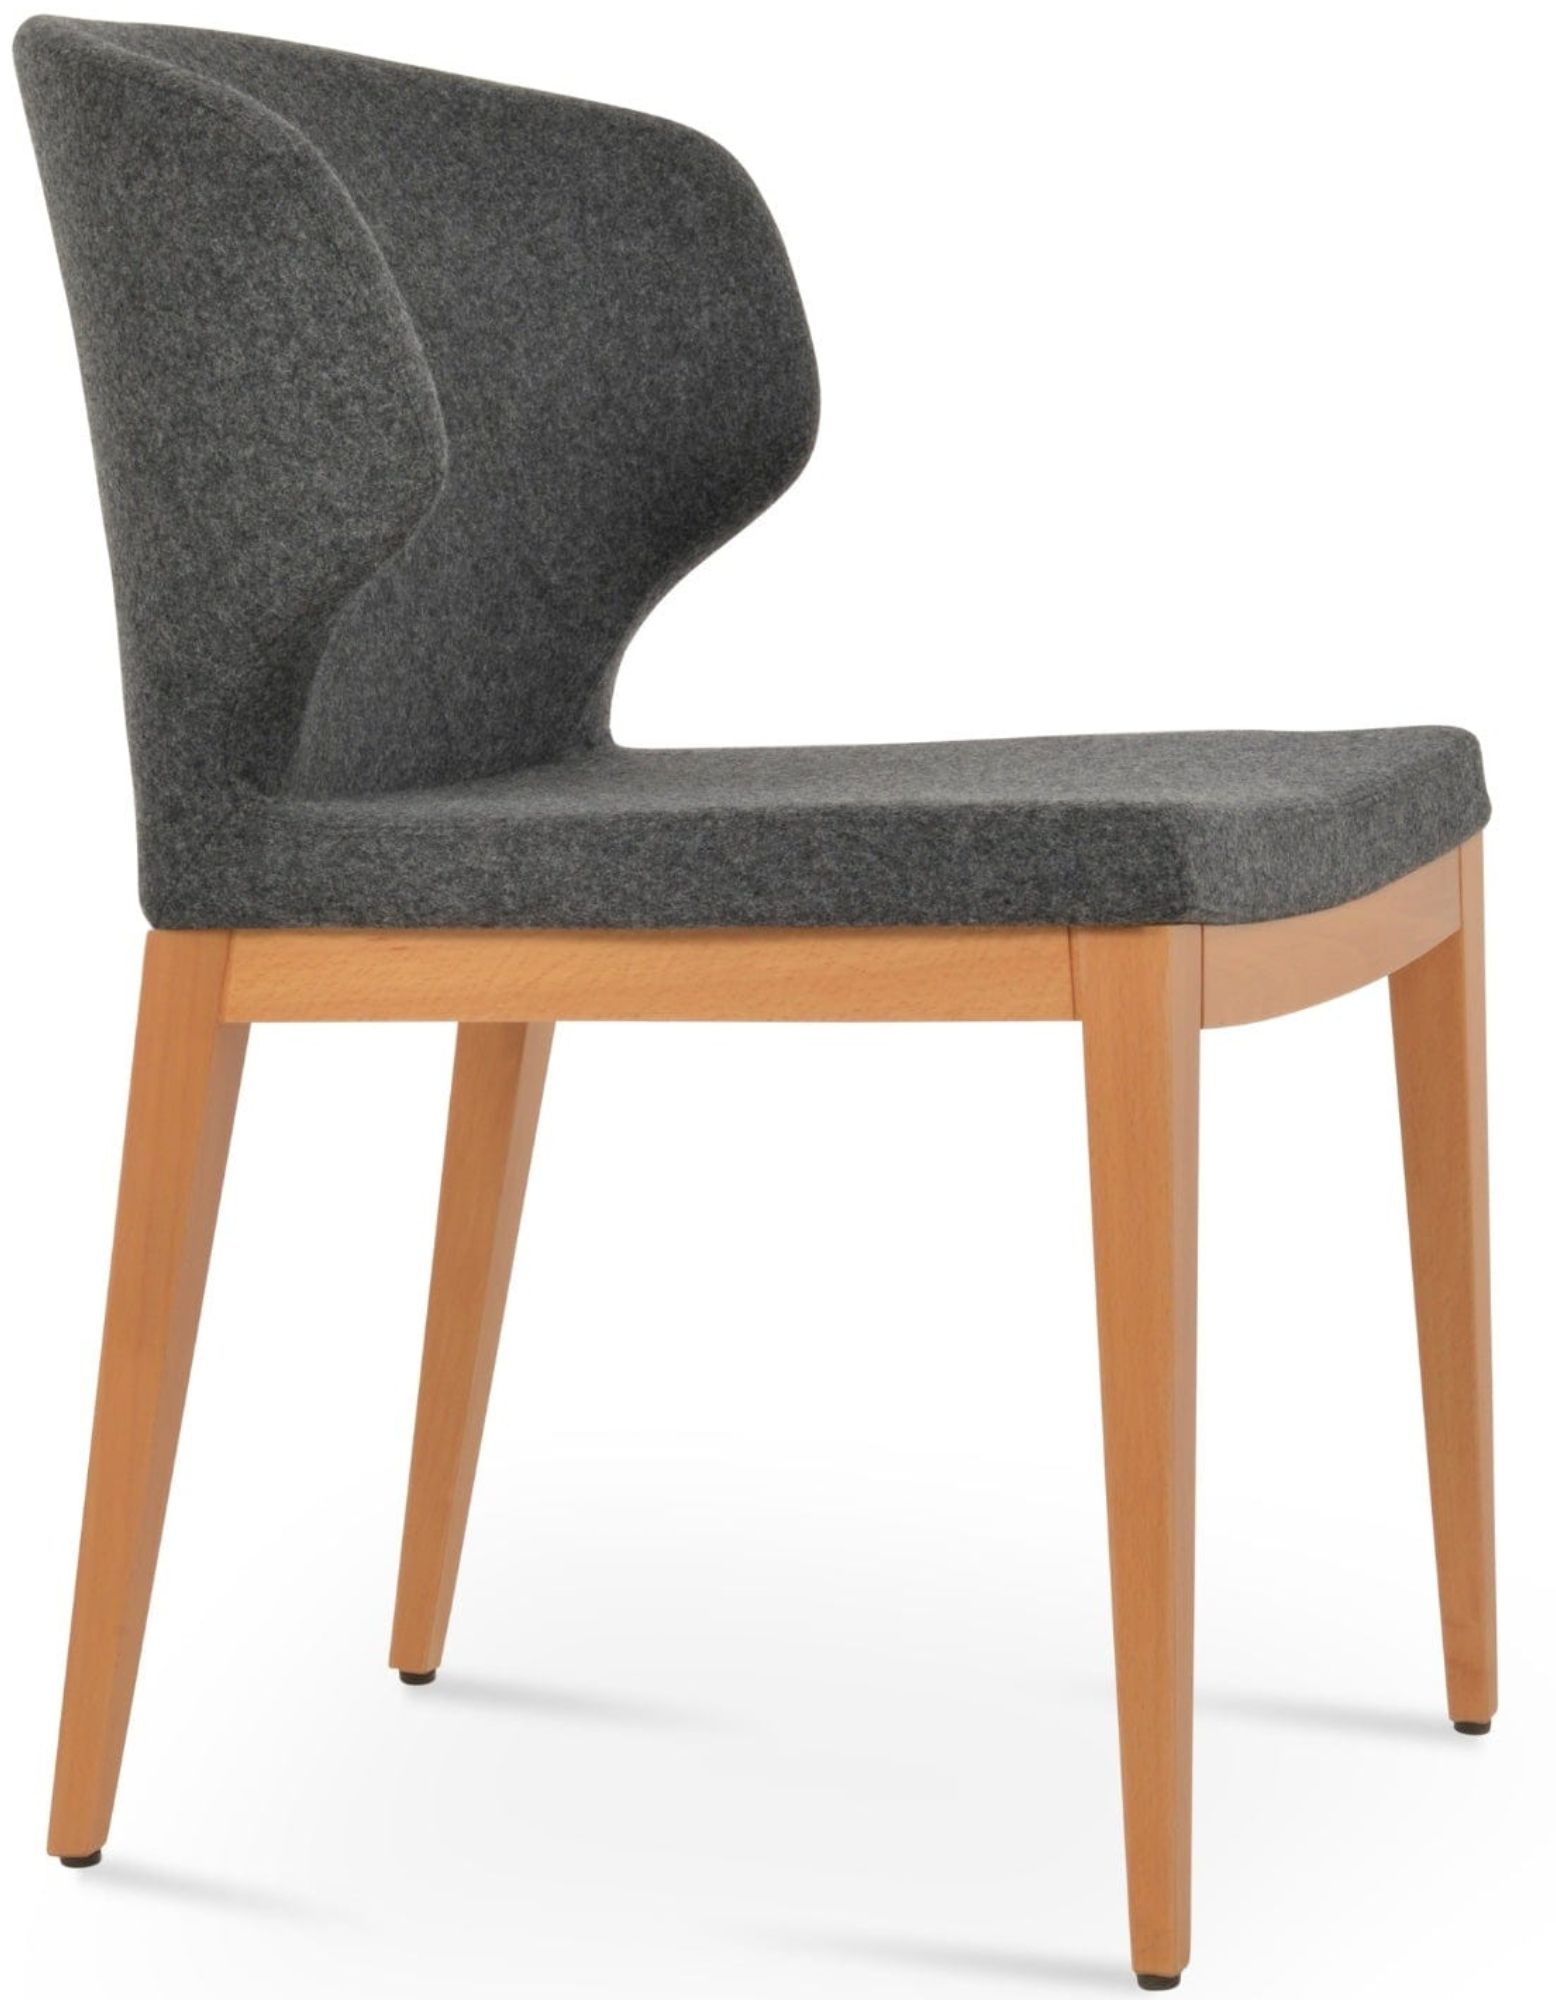 Your Bar Stools Canada Amed Wood wool upholstered dining chair